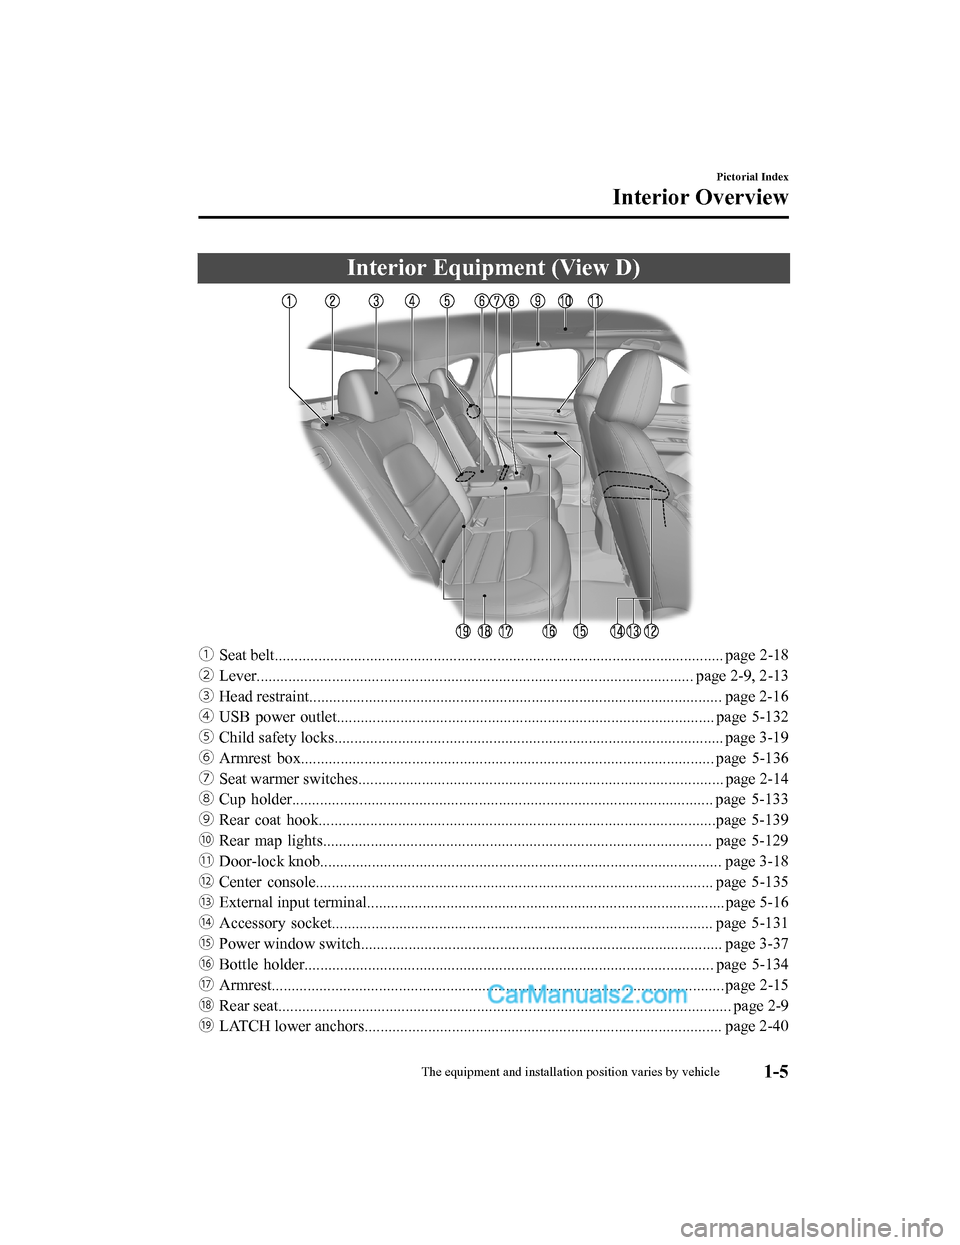 MAZDA MODEL CX-5 2018  Owners Manual (in English) Interior Equipment (View D)
ƒSeat belt................................................................................................................. page  2-18
„ Lever.........................